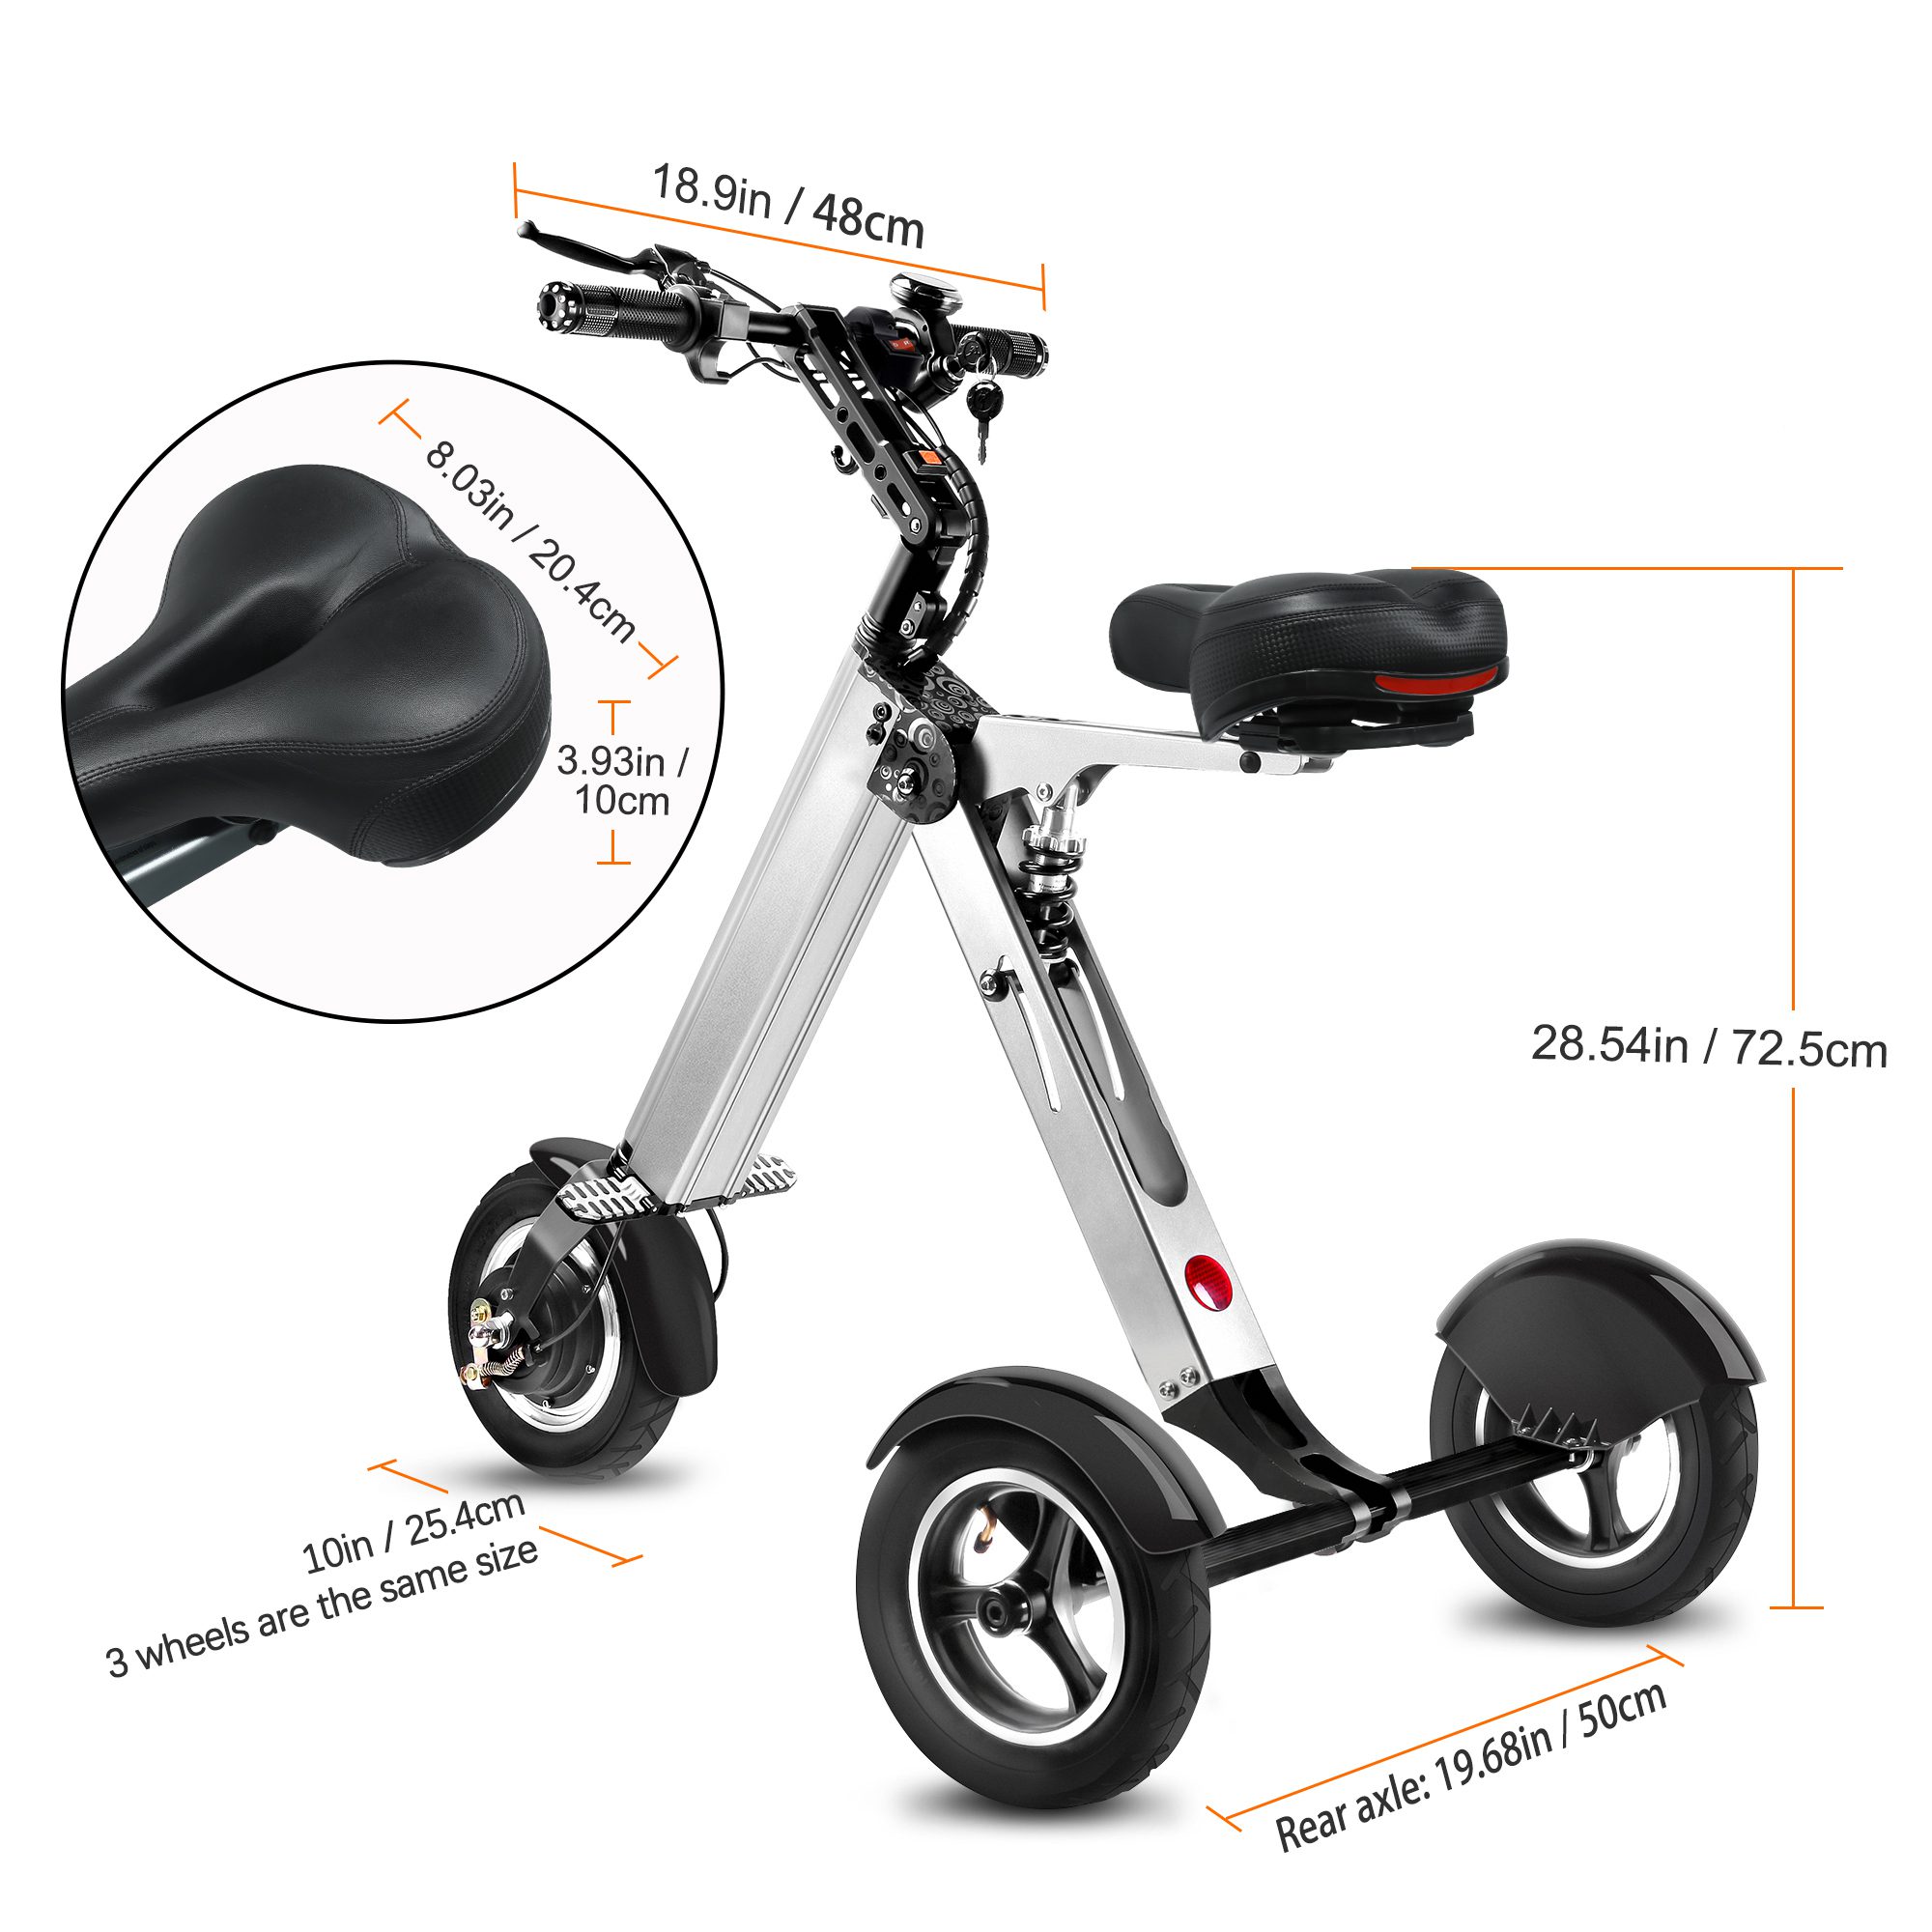 TopMate ES32 Scooter